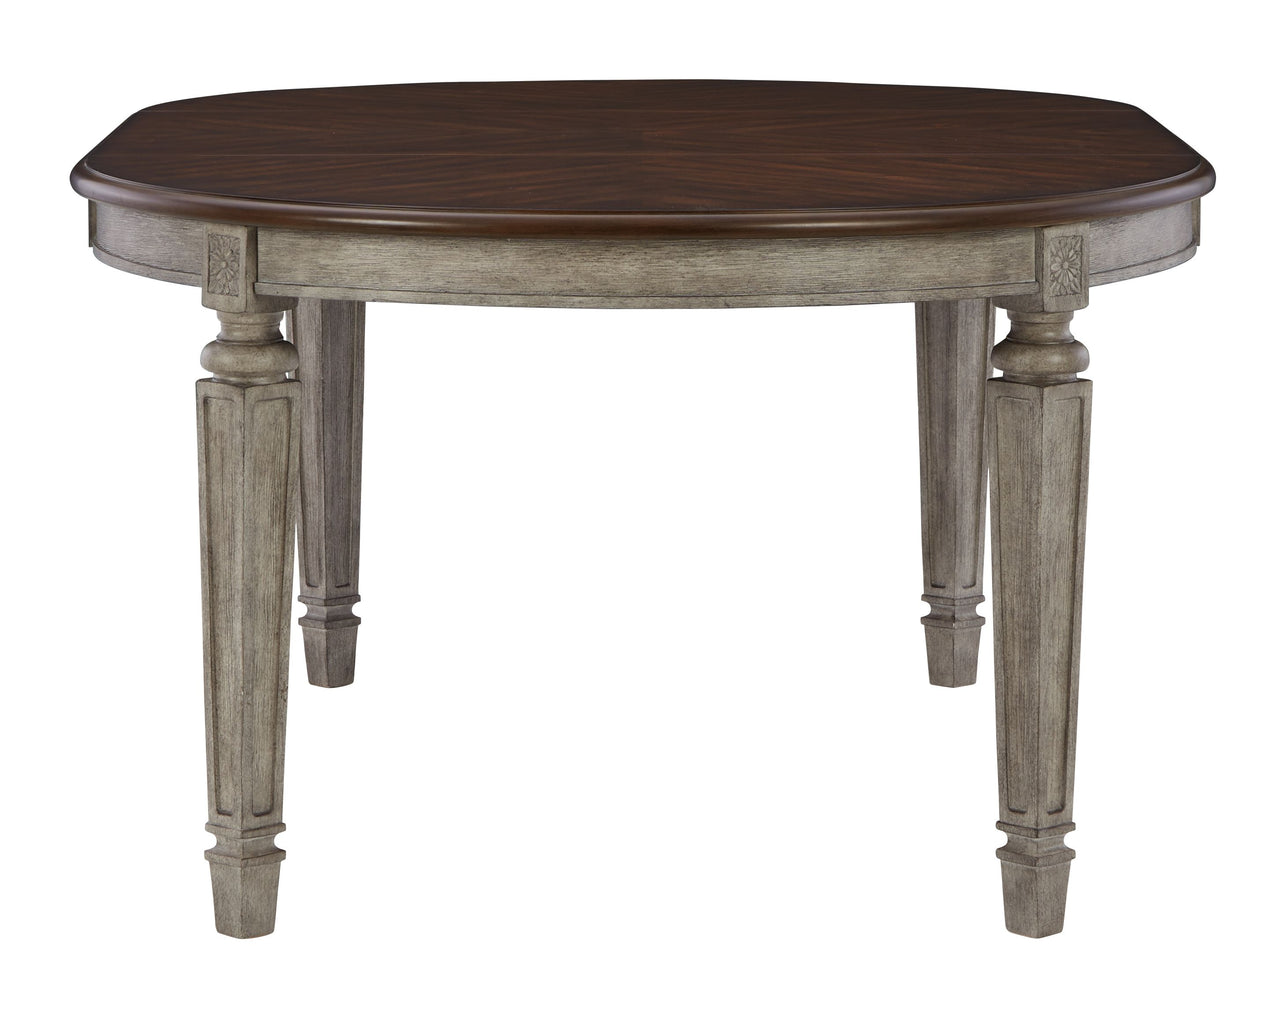 Lodenbay - Antique Gray - Oval Dining Room Extension Table - Tony's Home Furnishings